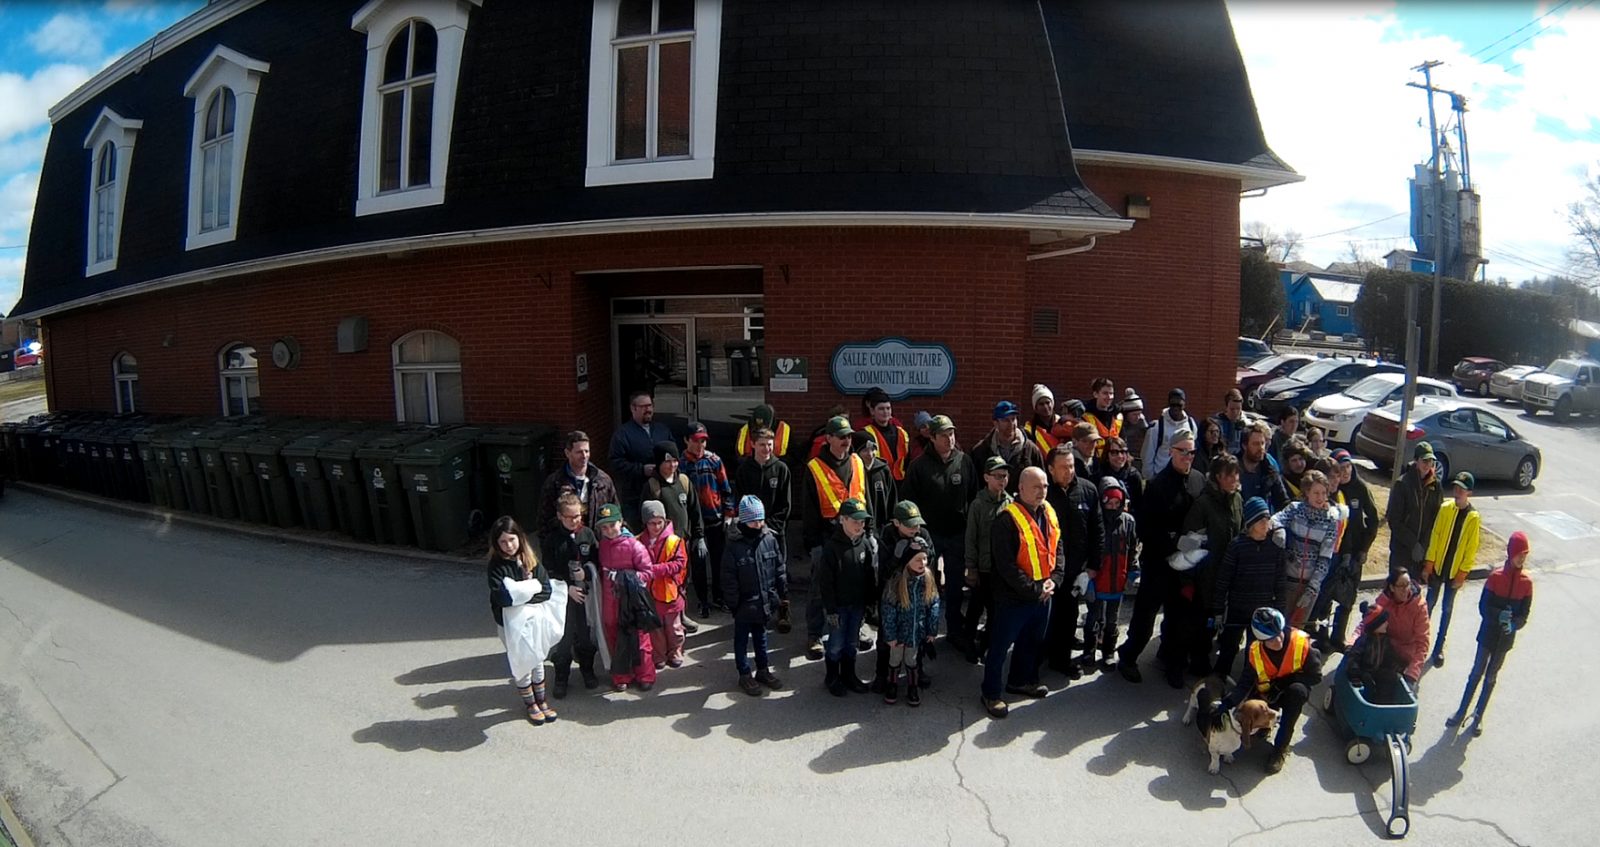 Annual community cleanup day in Lennoxville